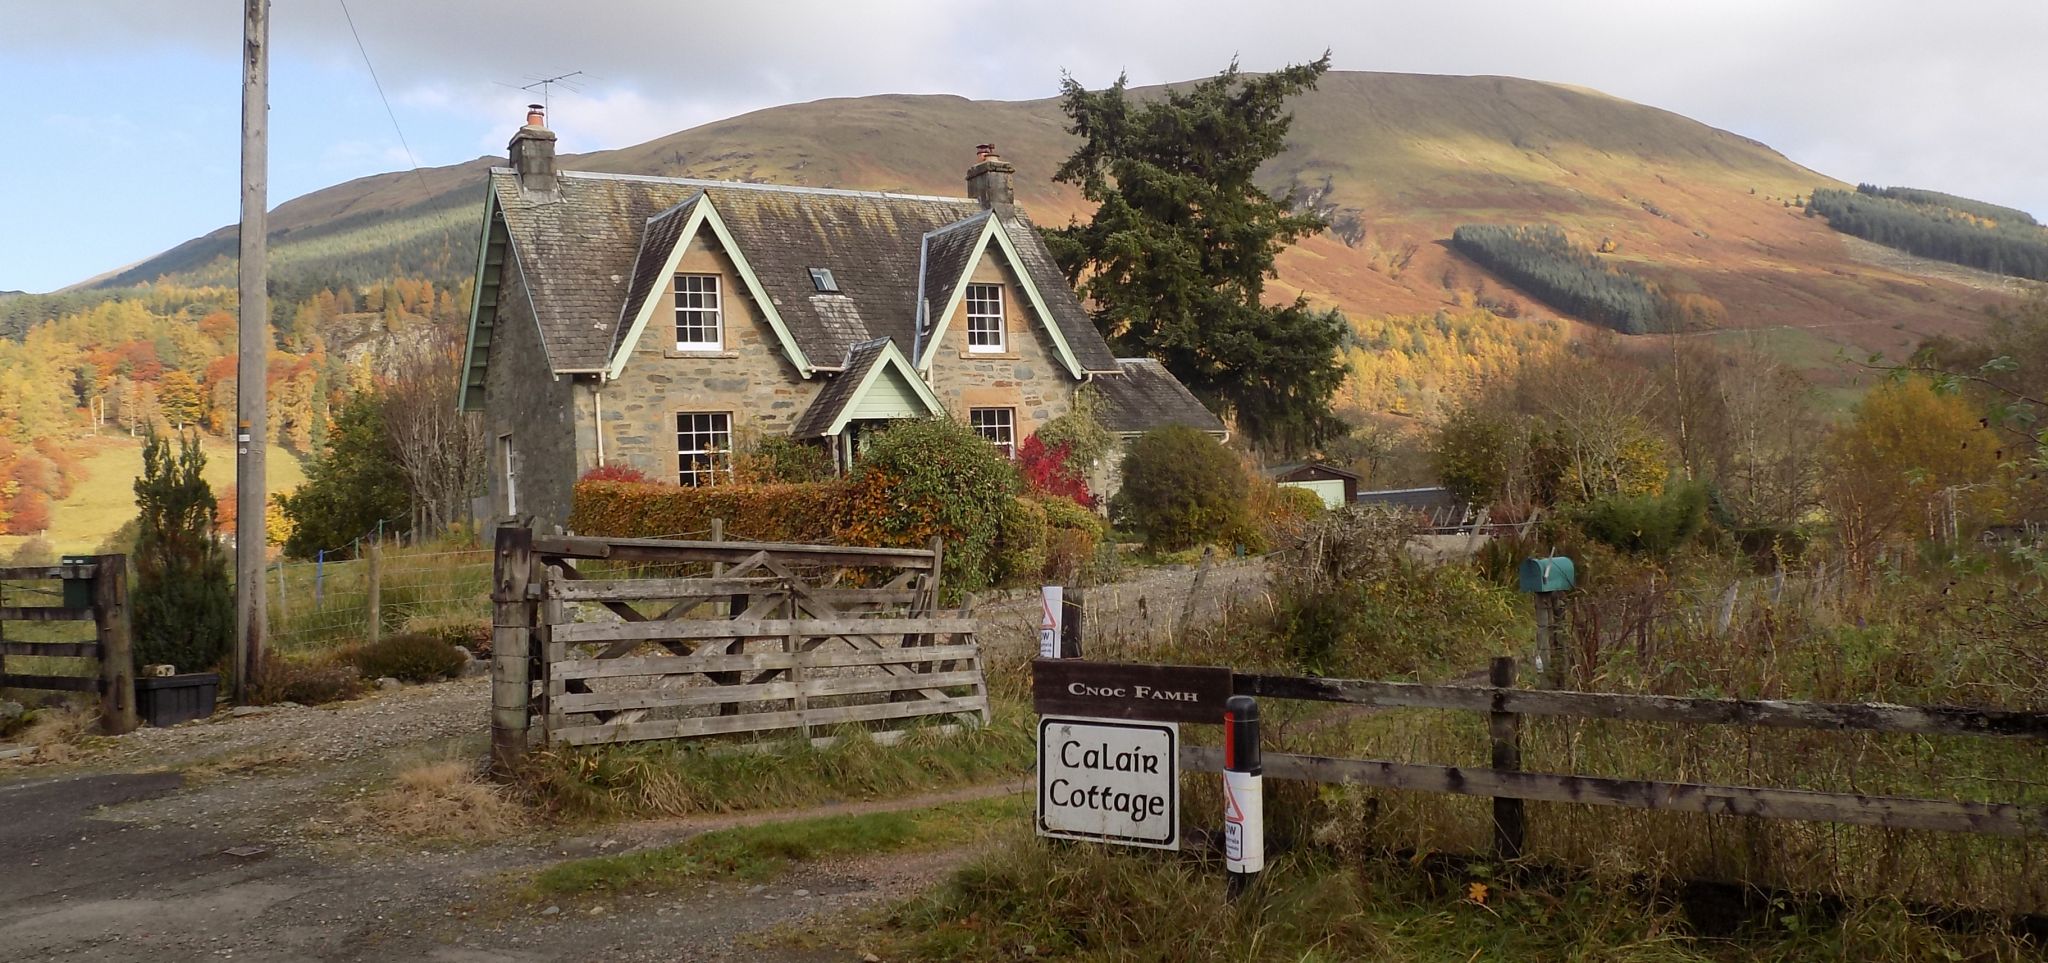 Callair Cottage on route to Balquhidder